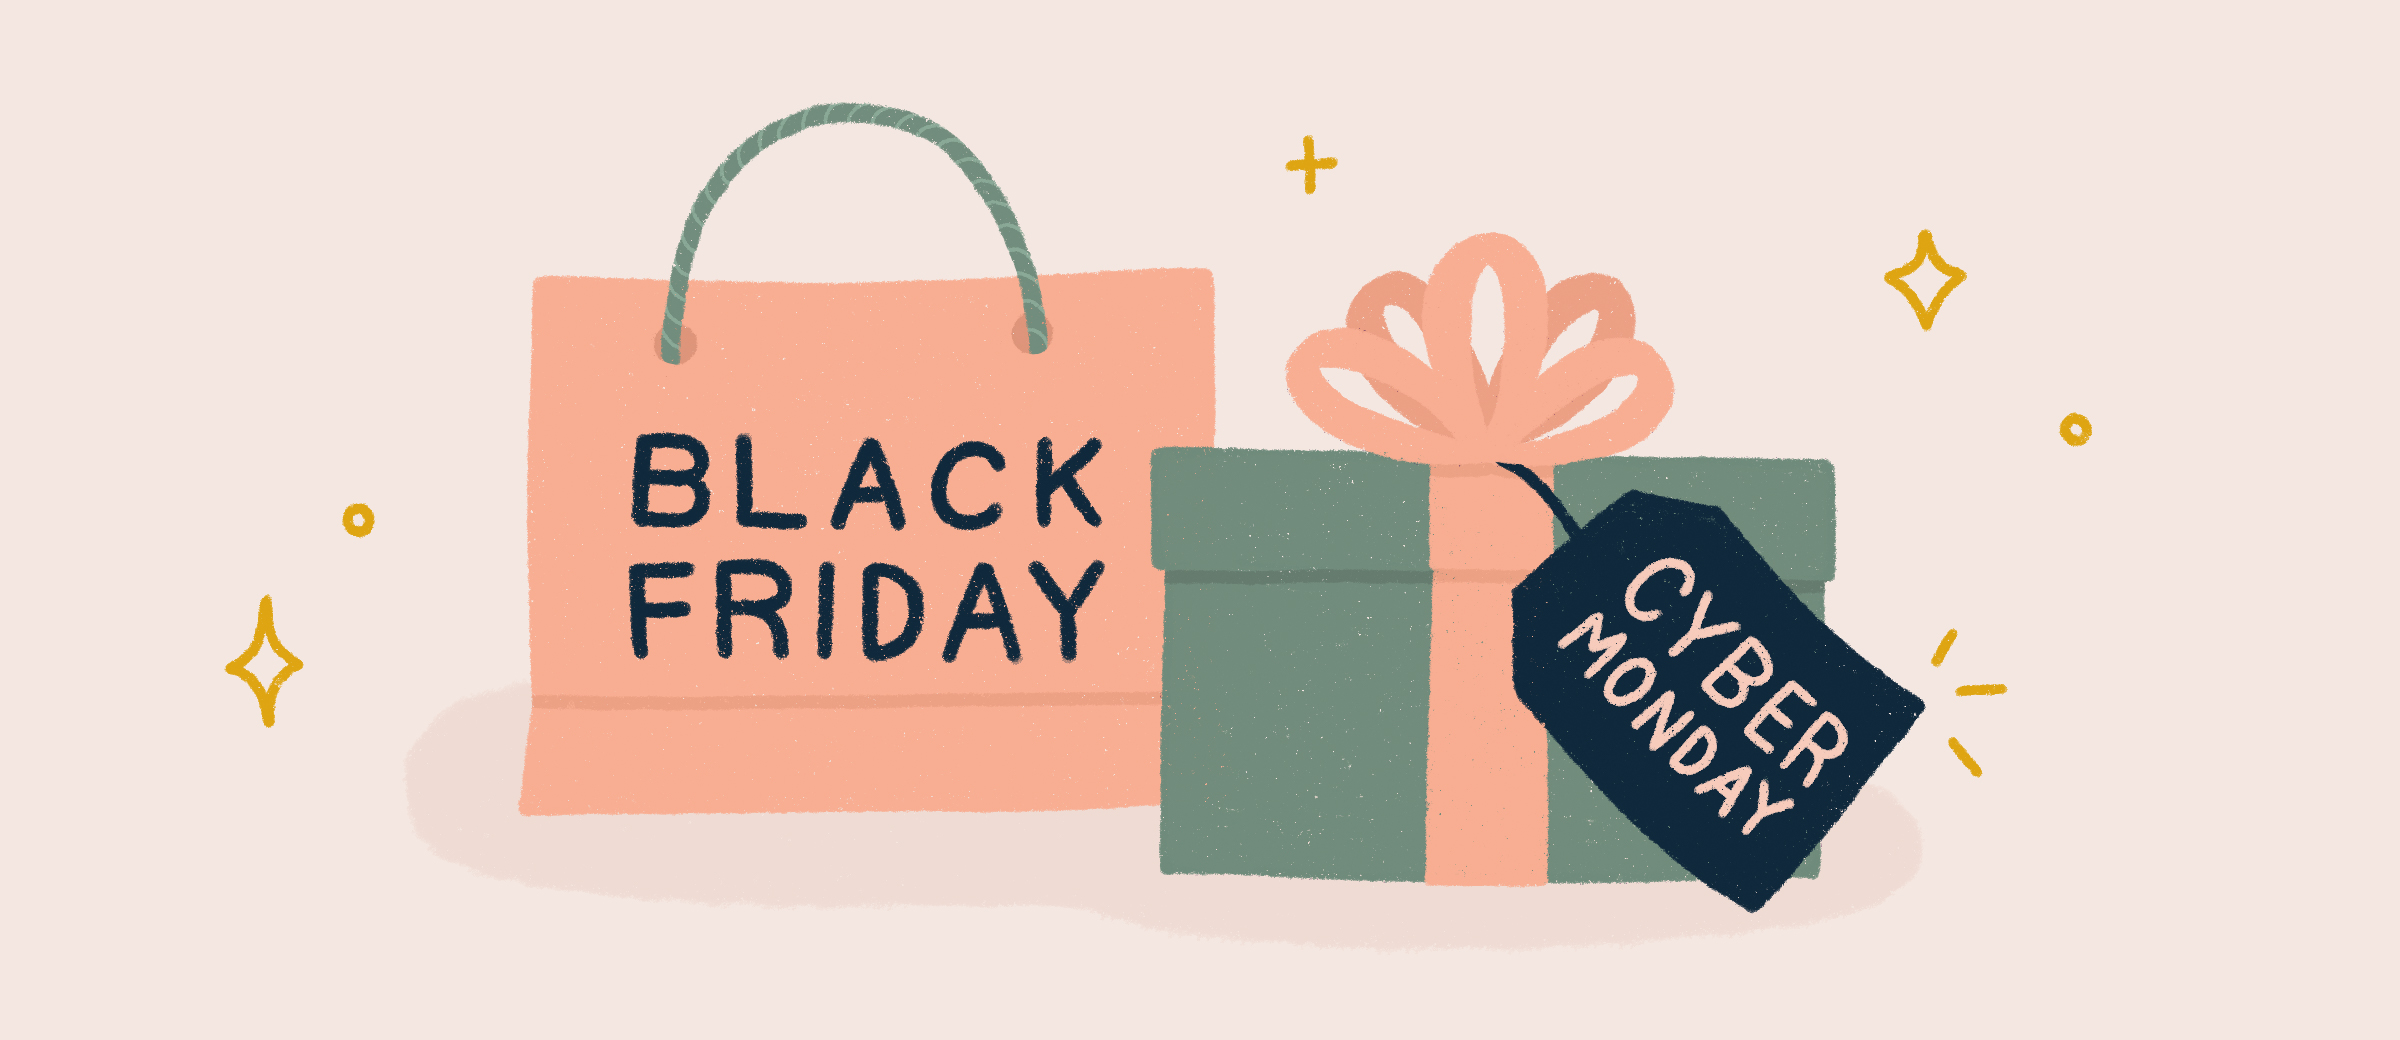 Read about Black Friday and Cyber Monday Marketing and Content Ideas, on PLANOLY